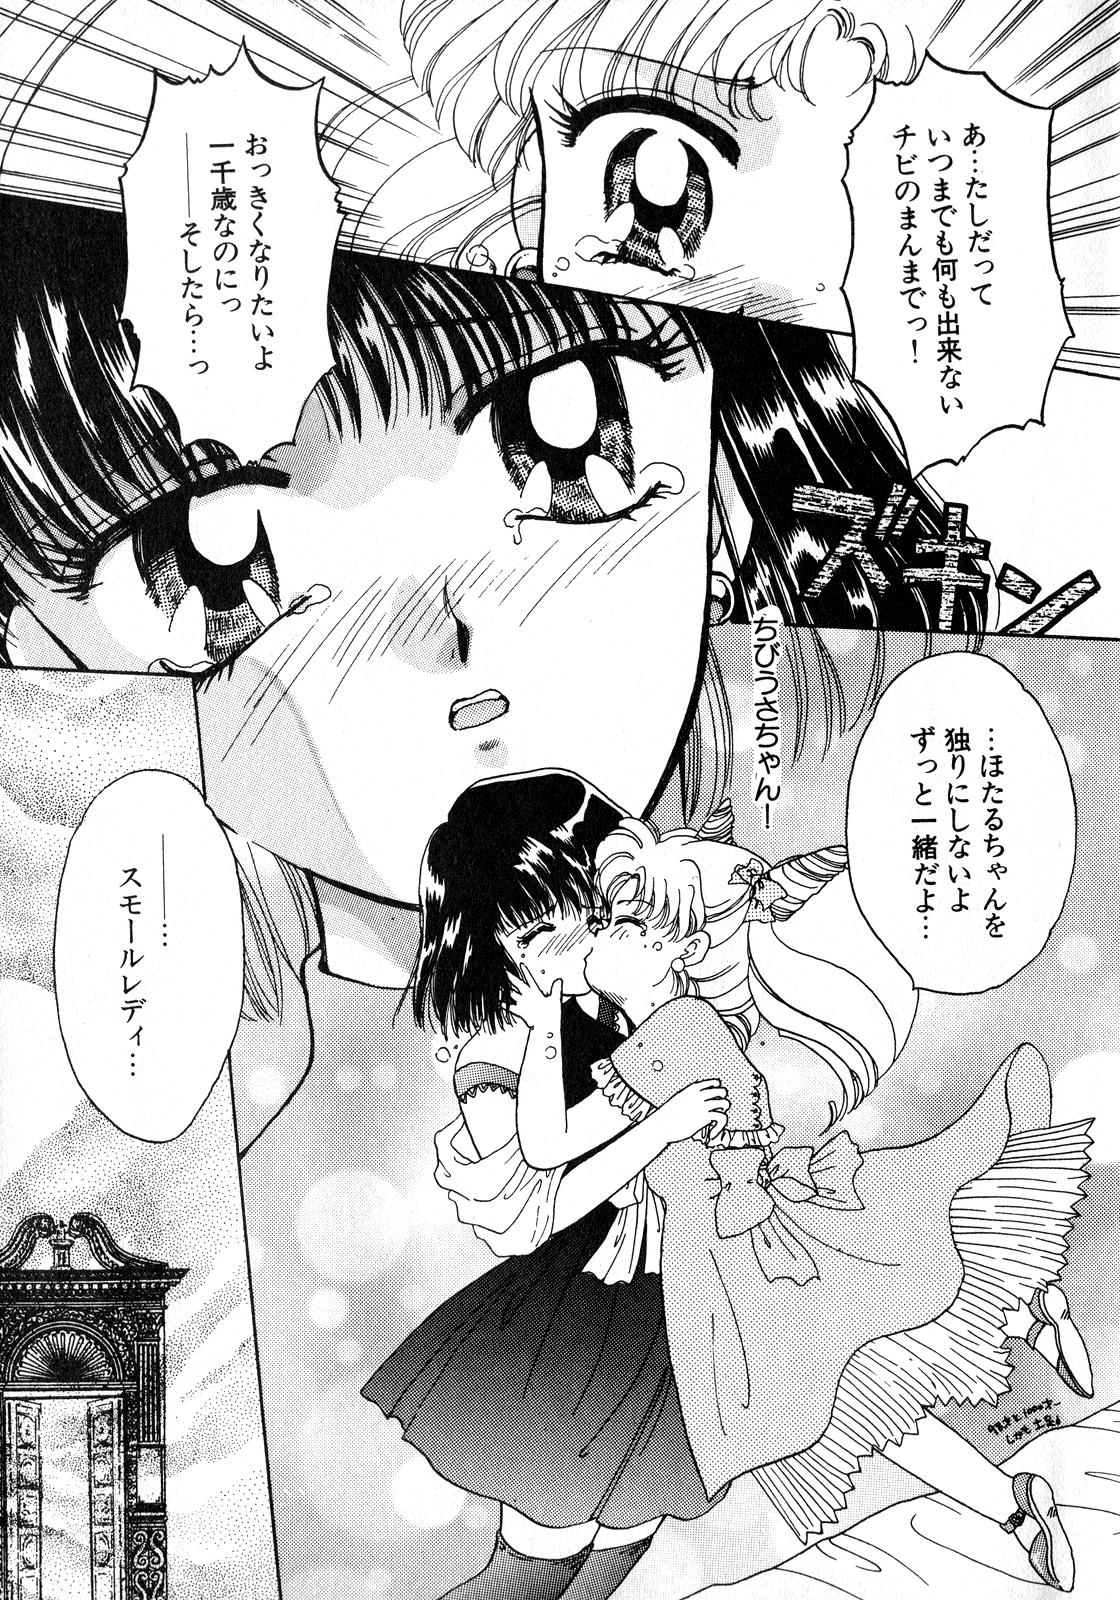 Teenager Lunatic Party 8 - Sailor moon Rola - Page 8